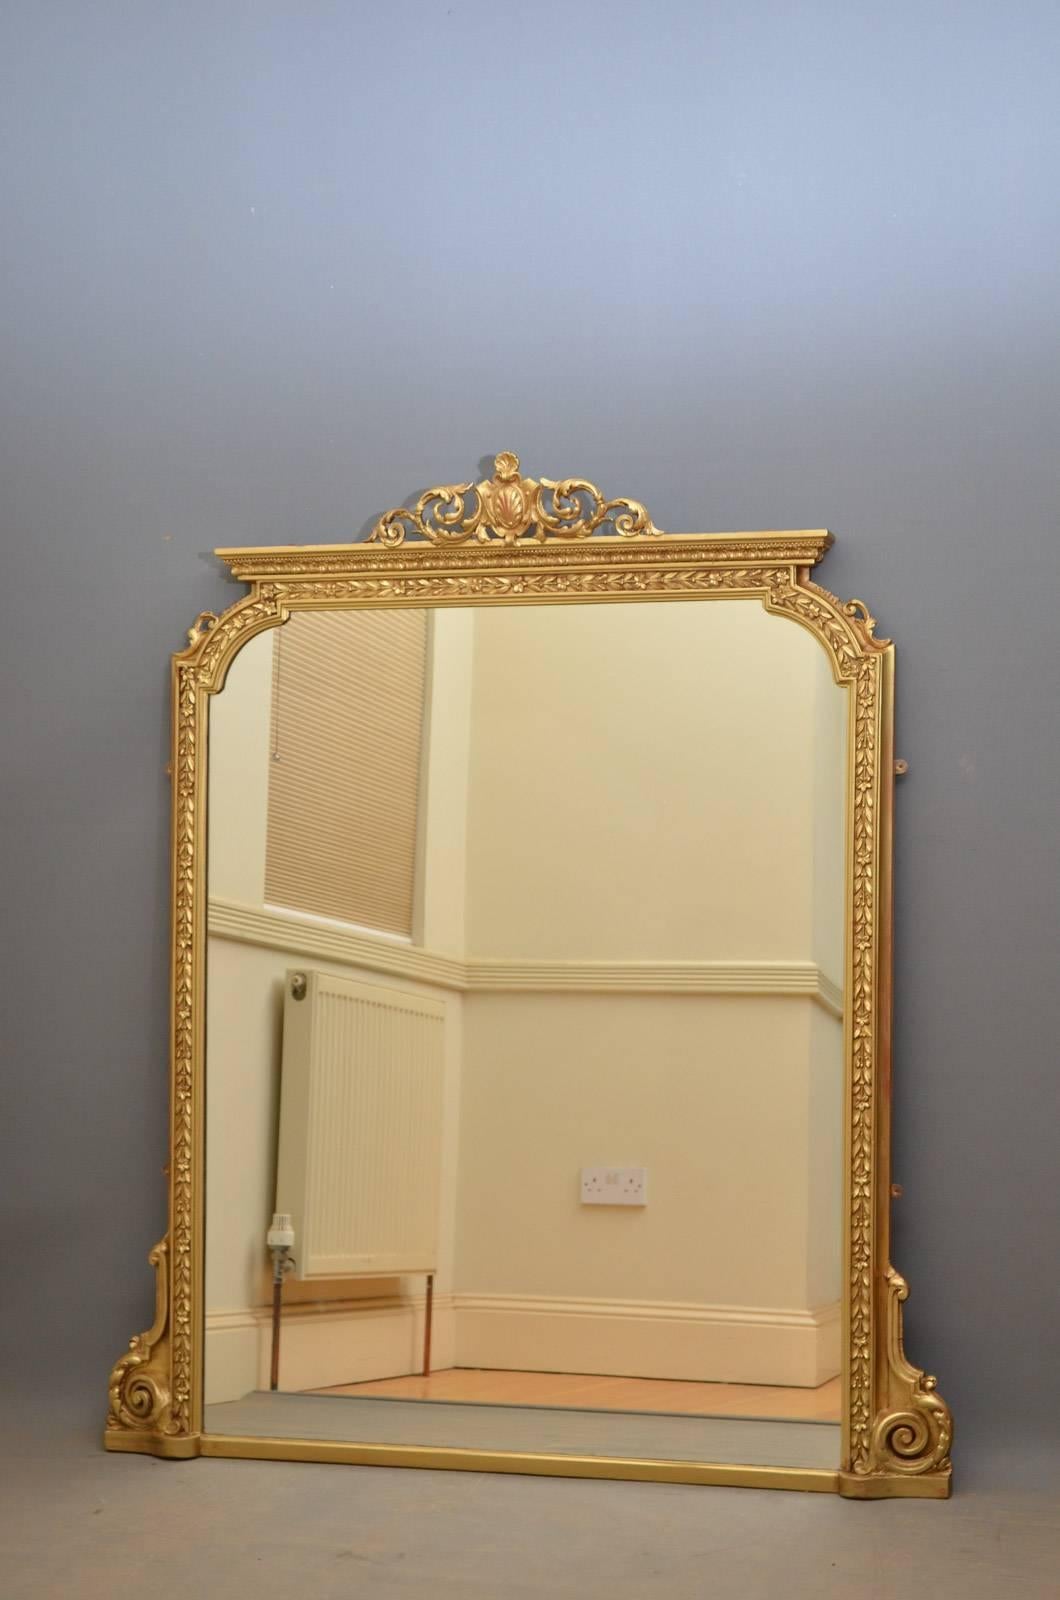 K0338 Large Victorian gilt wall mirror, having scroll cartouche to centre and original mirror plate with some foxing in finely decorated frame all flanked by foliage scrolls to base. This antique mirror has been refinished and is in home ready